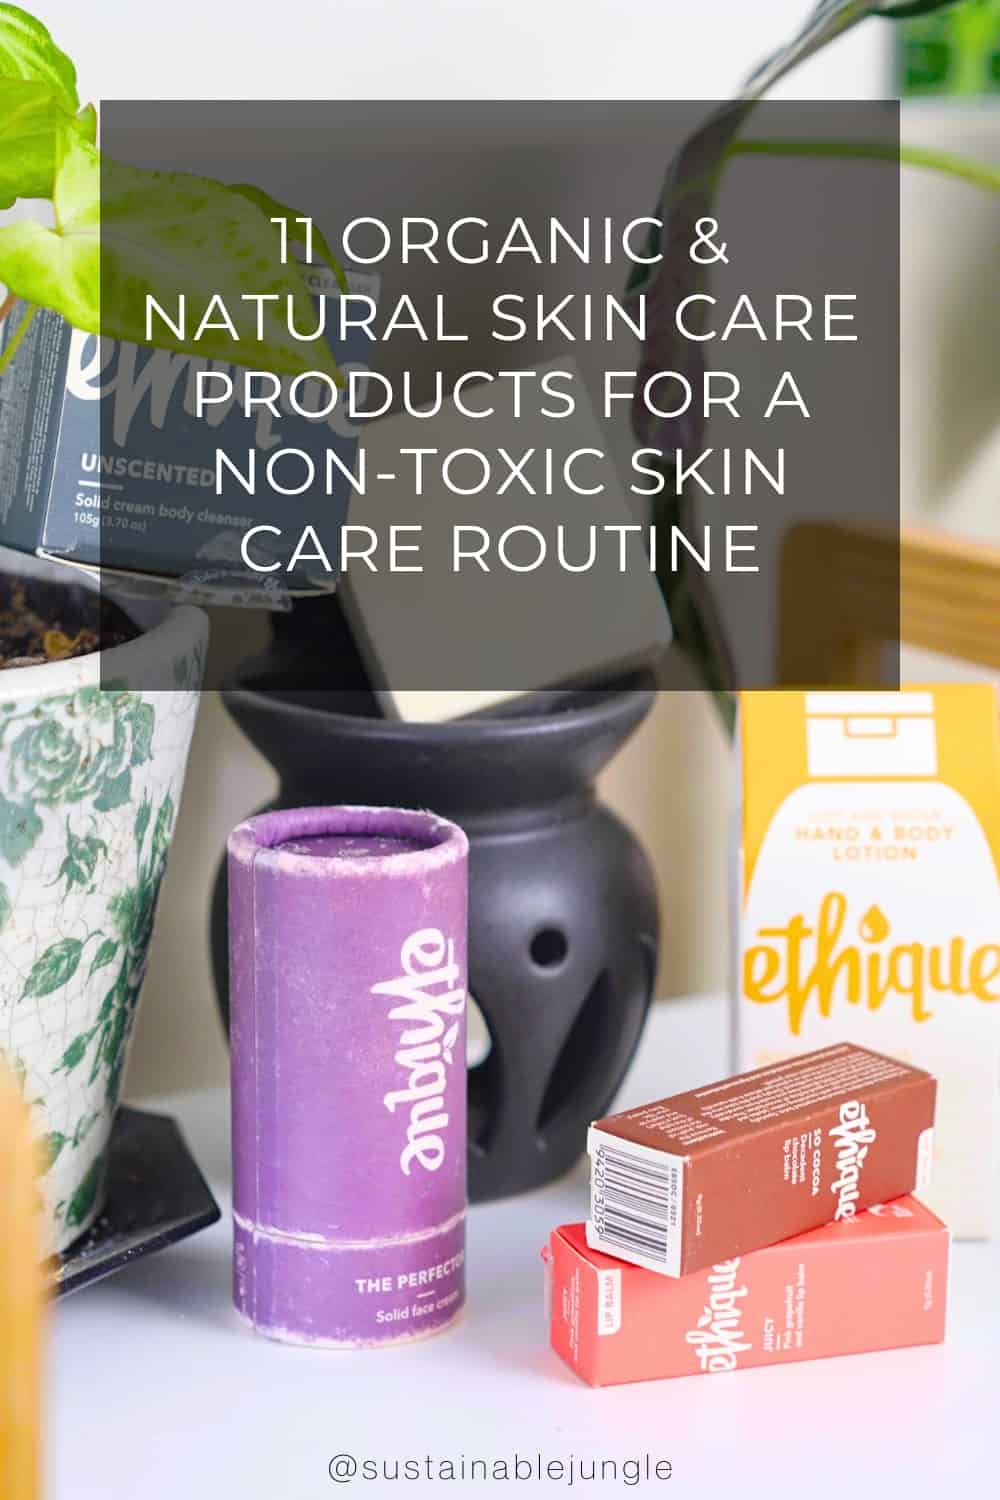 11 Organic & Natural Skin Care Products For A Non-Toxic Skin Care Routine Image by Sustainable Jungle #naturalskincare #naturalskincareproducts #naturalskincarebrands #organicskincarebrands #naturalandorganicskincare #organicantiagingskincare #sustainablejungle